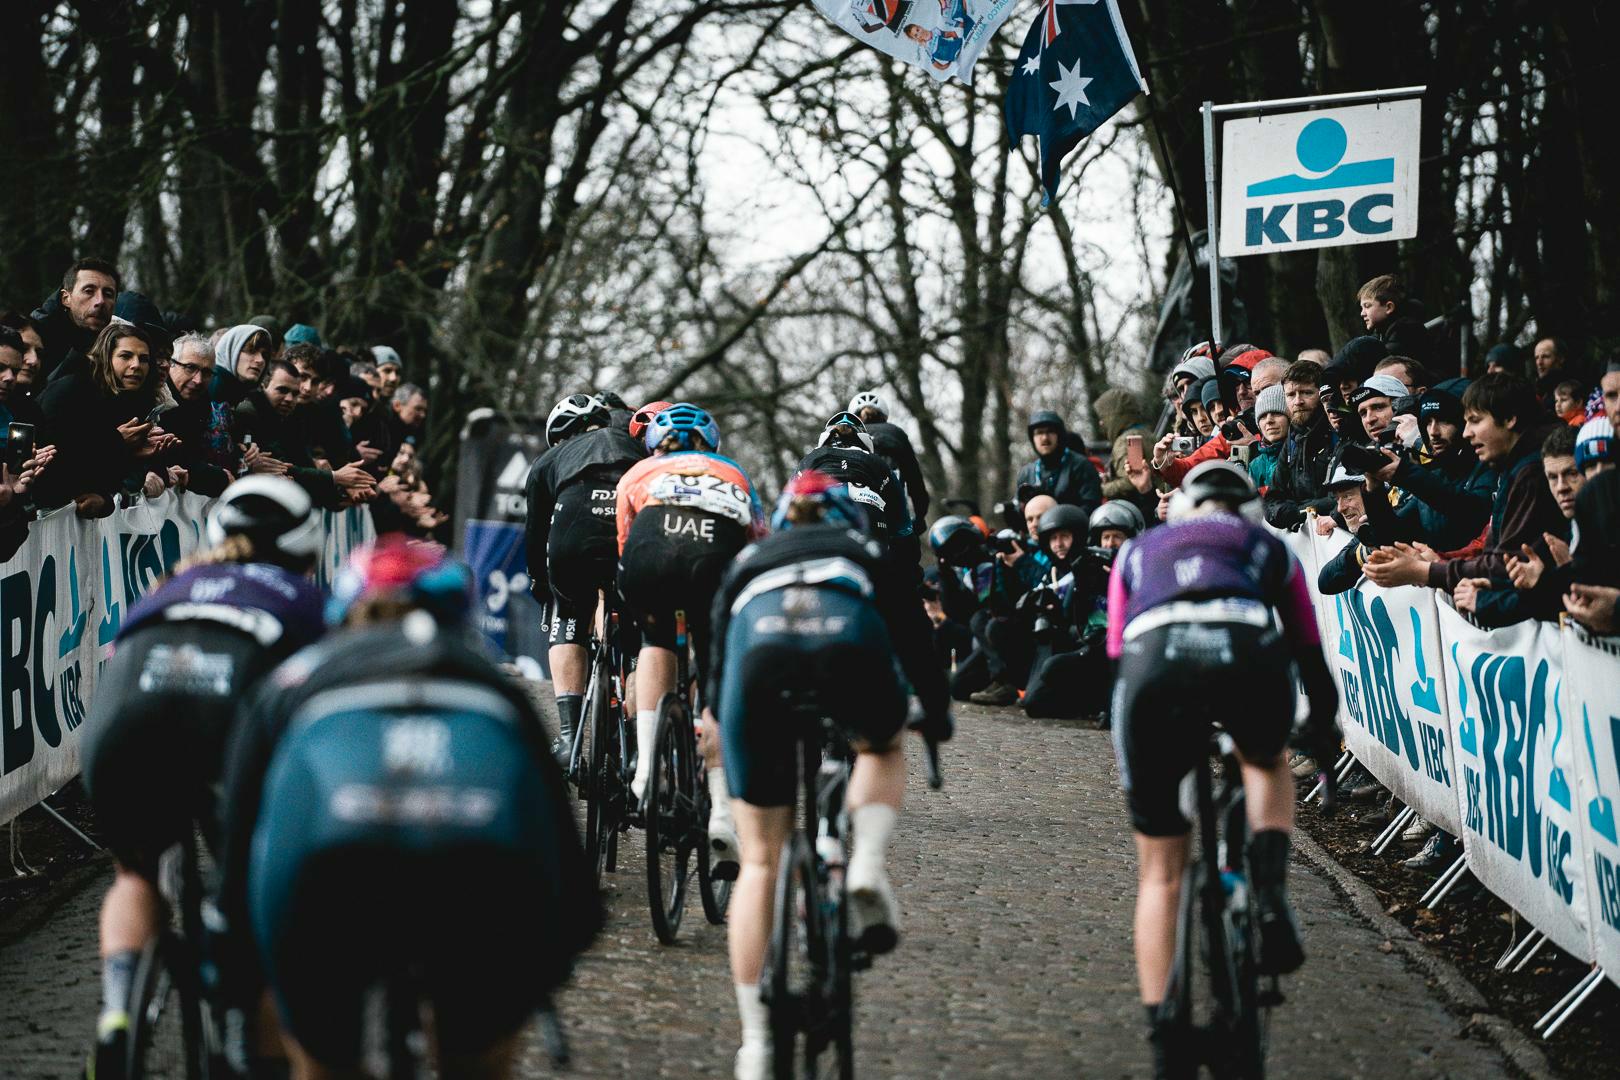 Follow Gent-Wevelgem in Flanders Fields on these broadcasters